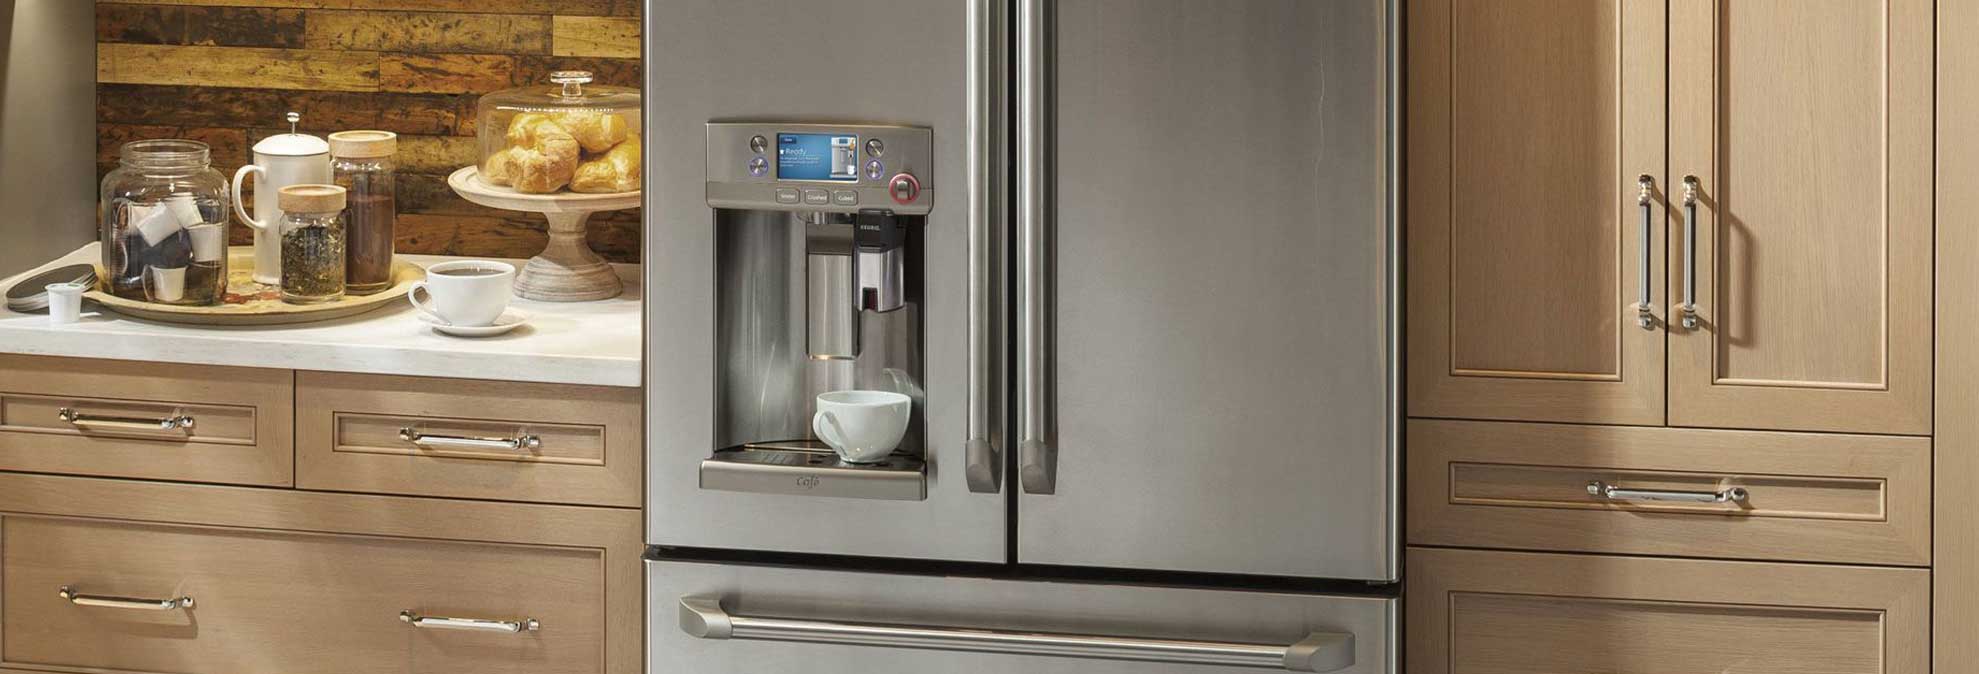 When a Counter-Depth Refrigerator Is the Best Fit - Consumer Reports - 